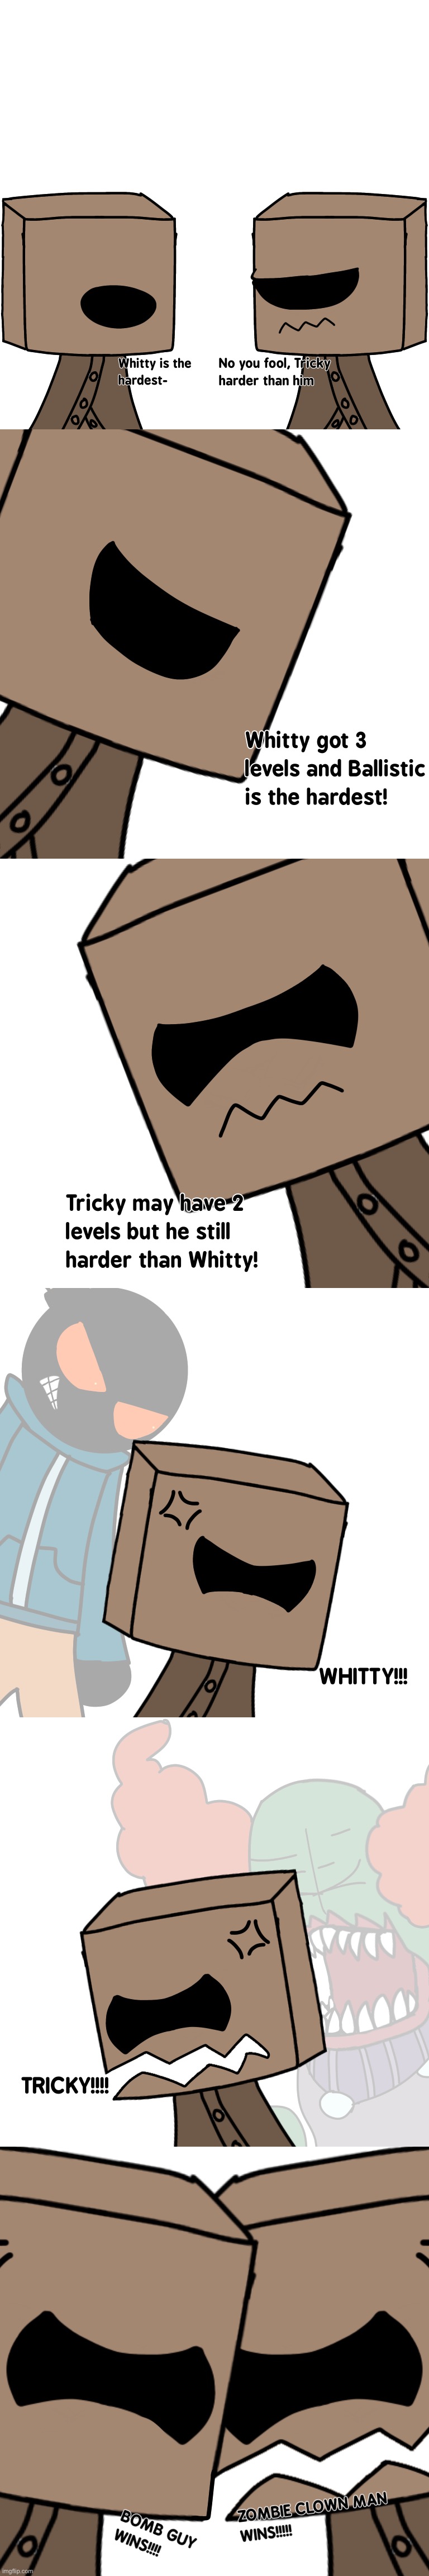 aMONOgus and Impostor aMONOgus: Whitty and Tricky | image tagged in comics/cartoons | made w/ Imgflip meme maker